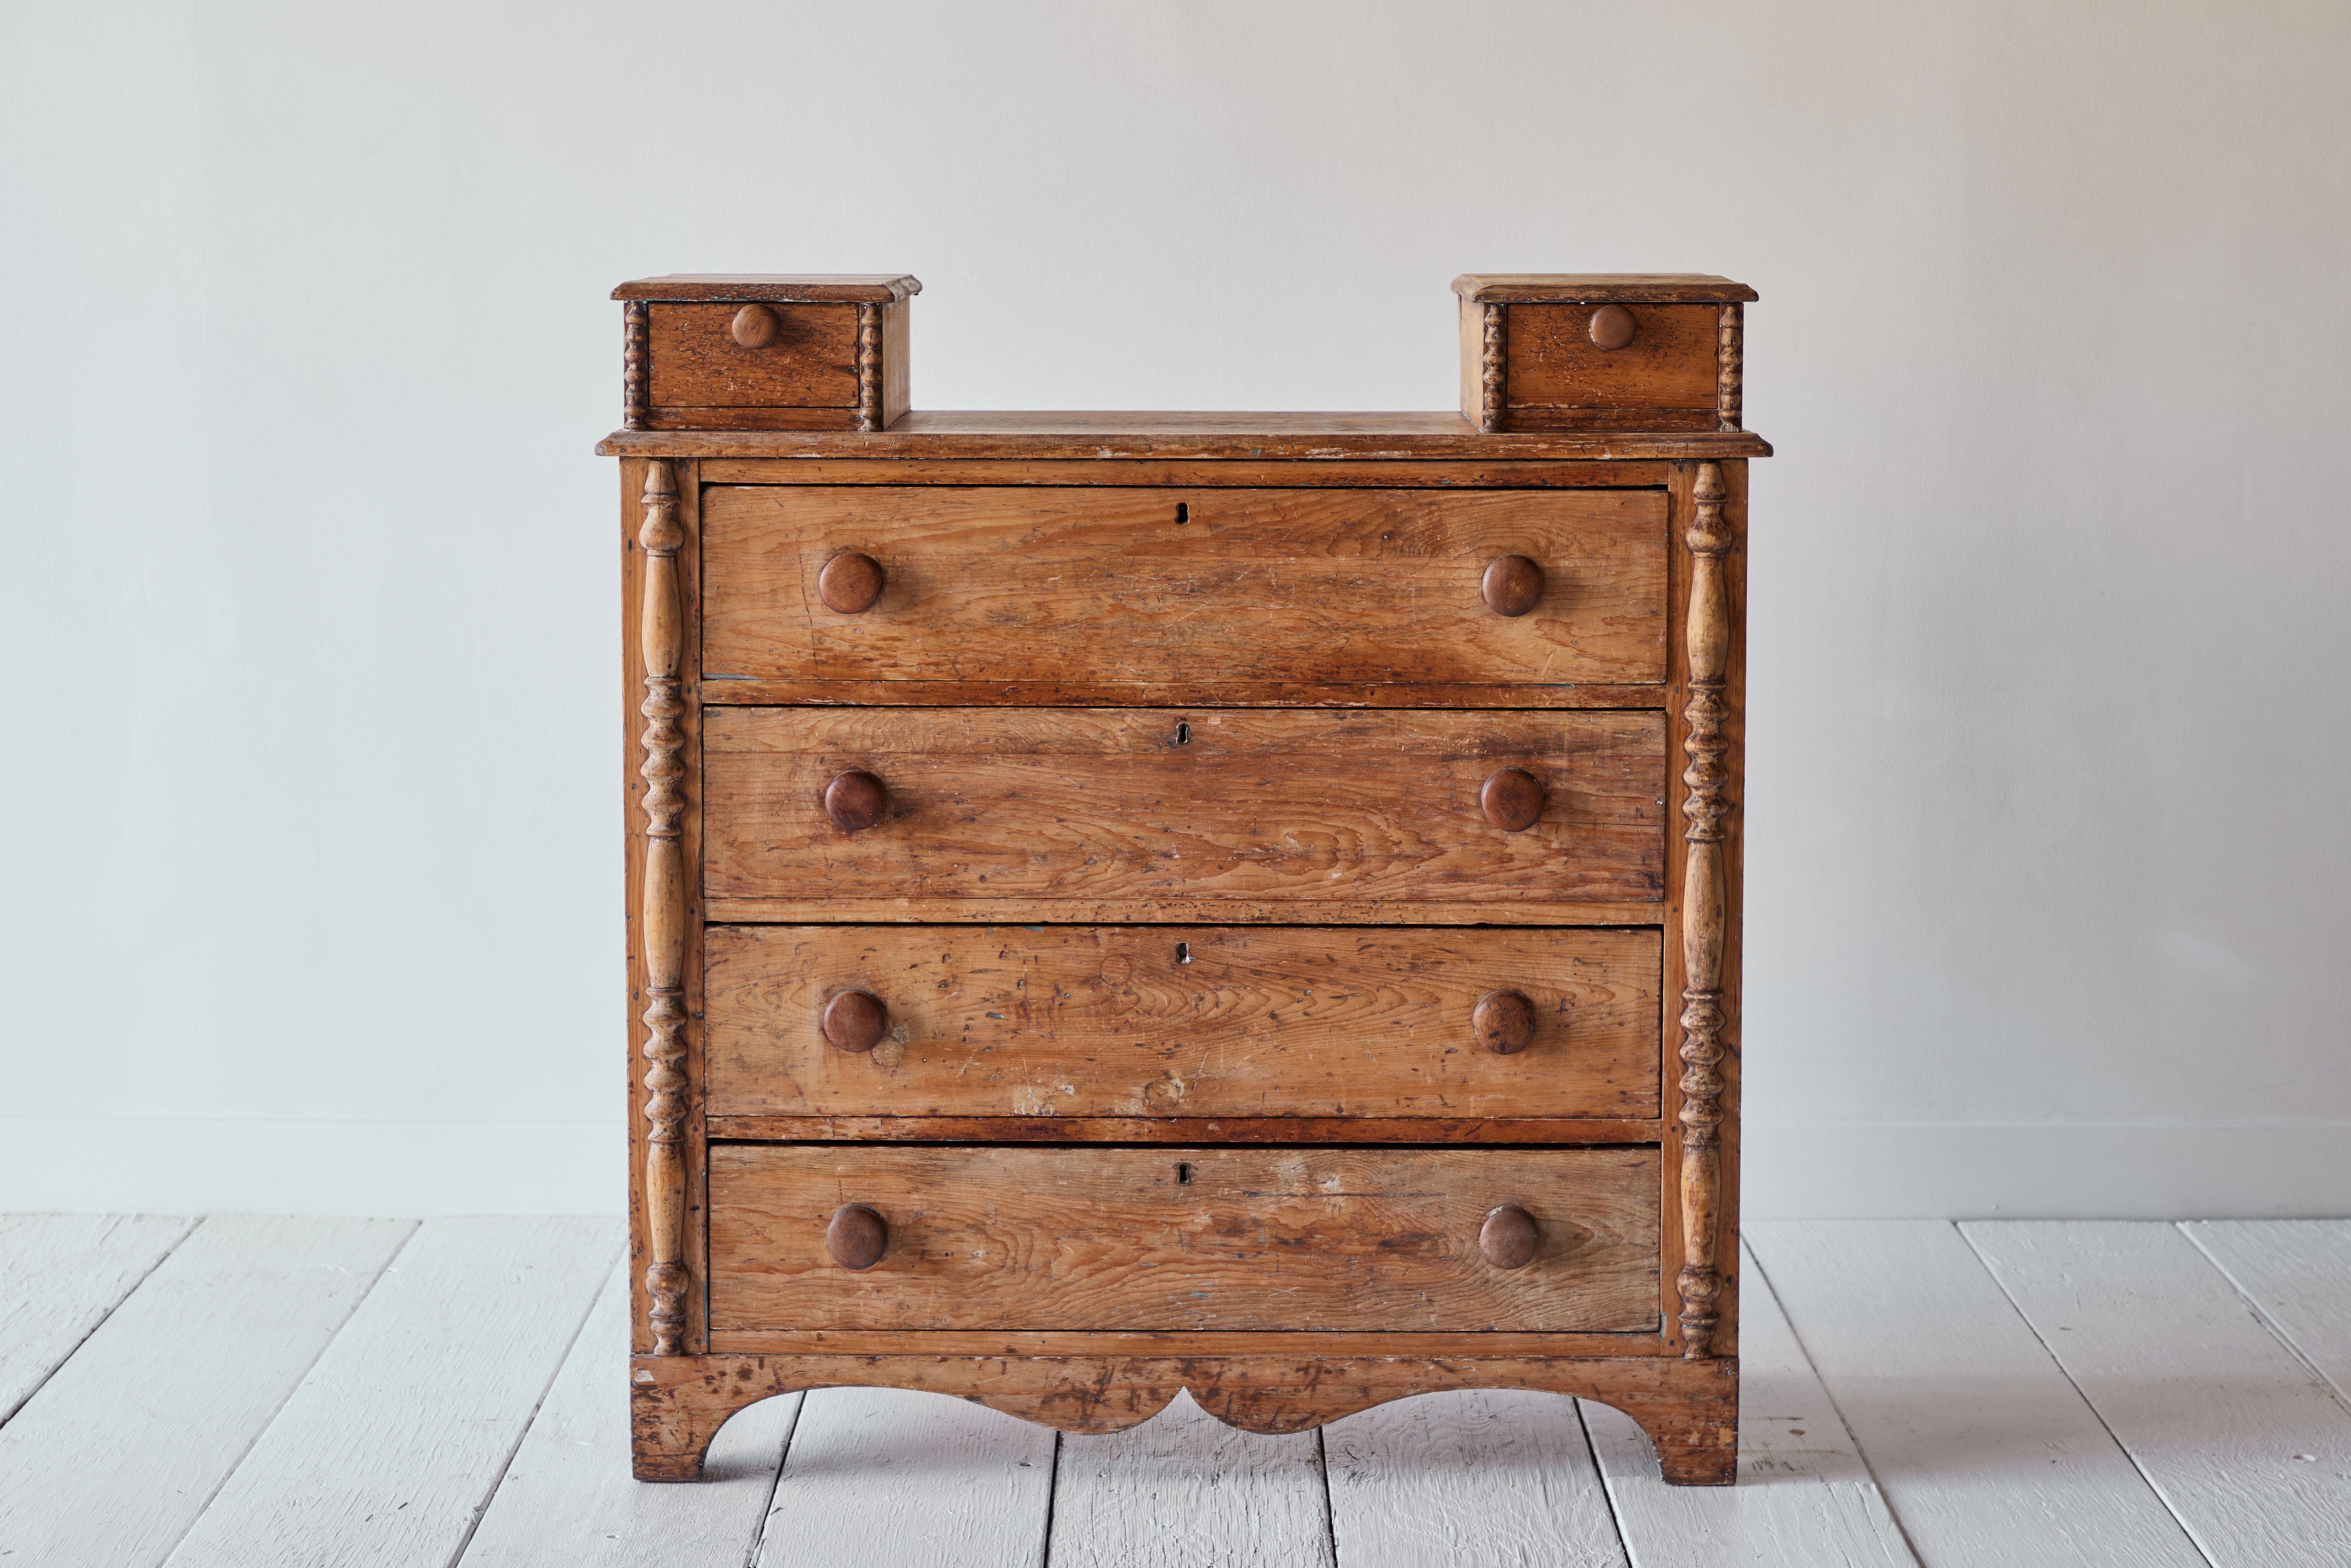 This 19th century English pine dresser features 4 large drawers with two smaller drawers that sit on either side of the top of the dresser. The beautiful spool detail makes this dresser an extra special piece. The dresser has a charming patina that